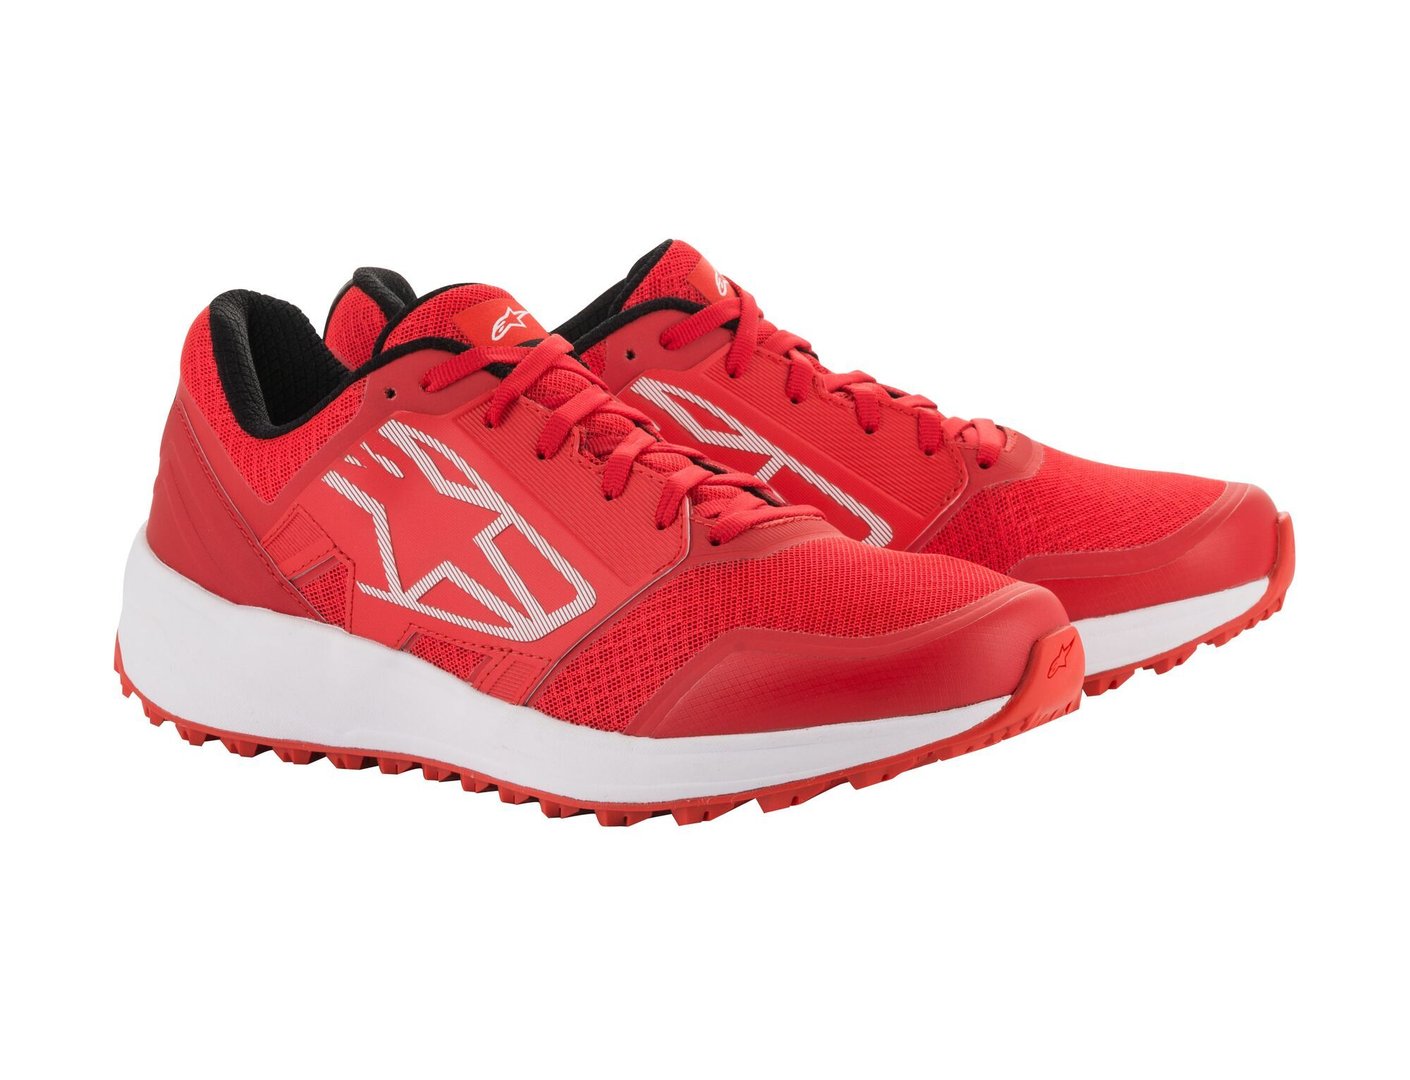 ALPINESTARS 2654820_32_6 META TRAIL RUNNING shoes, red/white, size 38 (6) (Фото-1)